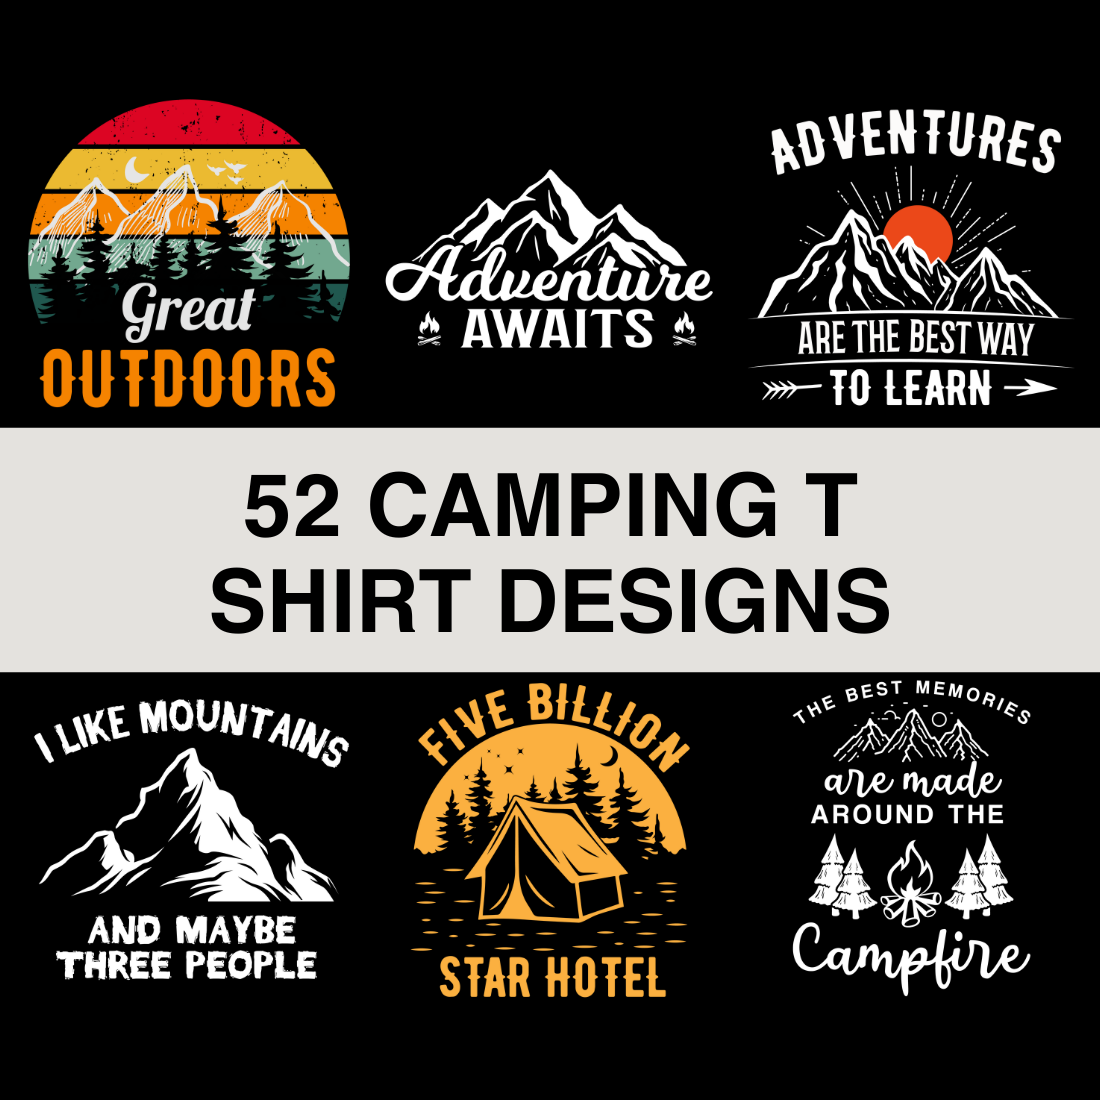 52 Camping T Shirt Designs That Generate Sales cover image.